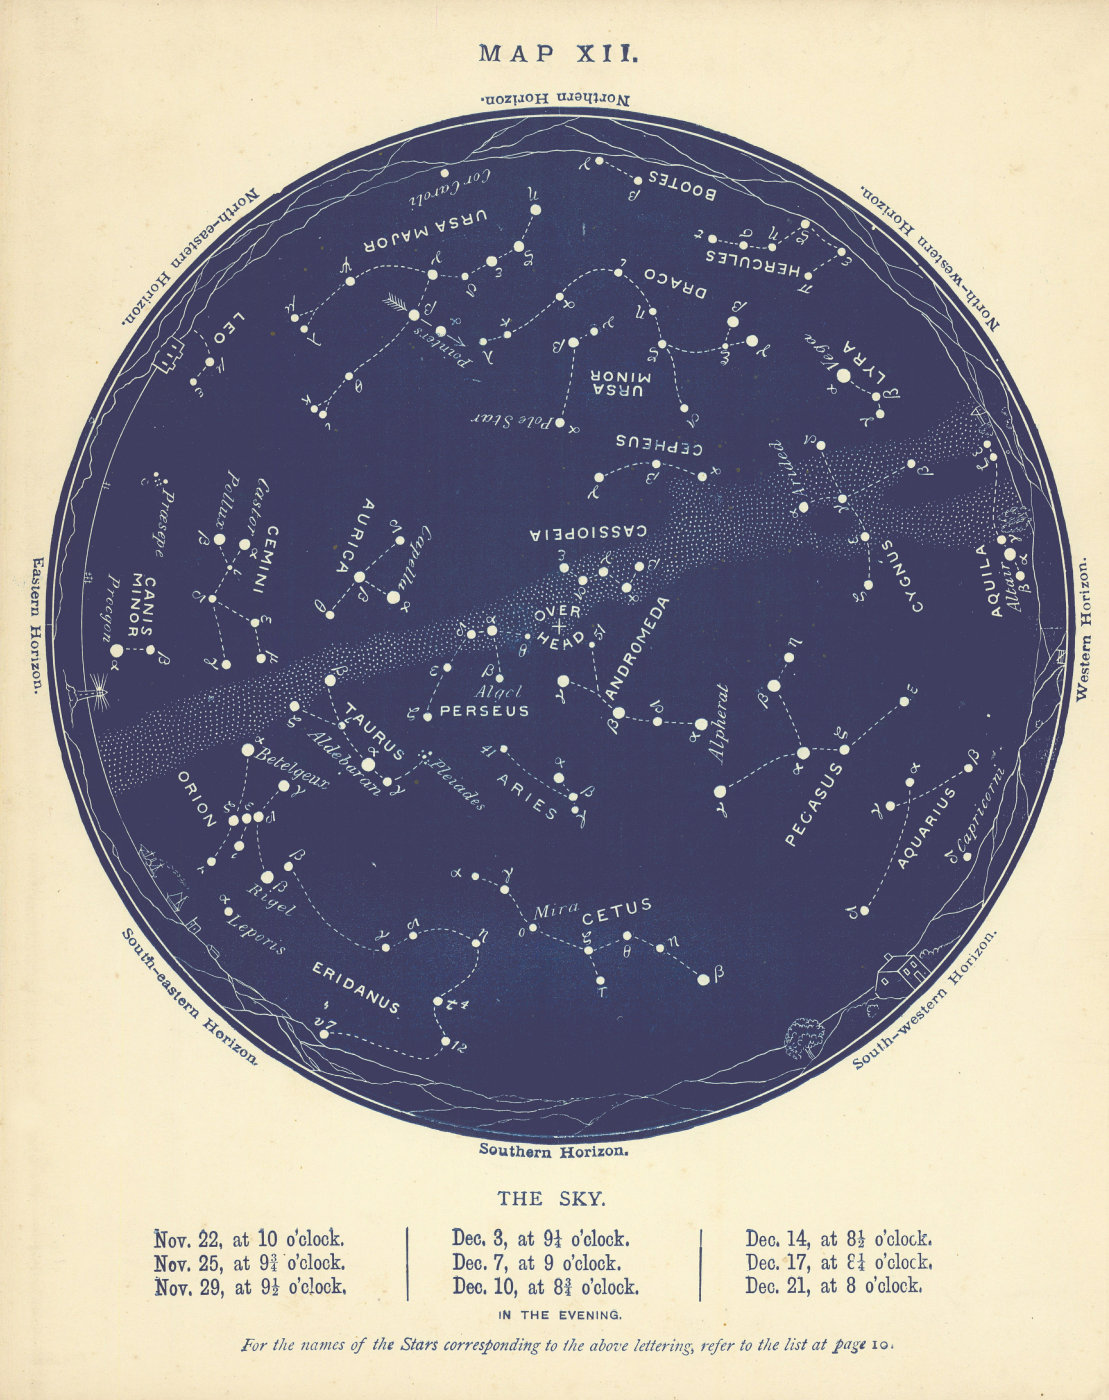 Associate Product STAR MAP XII. The Night Sky. November-December. Astronomy. PROCTOR 1896